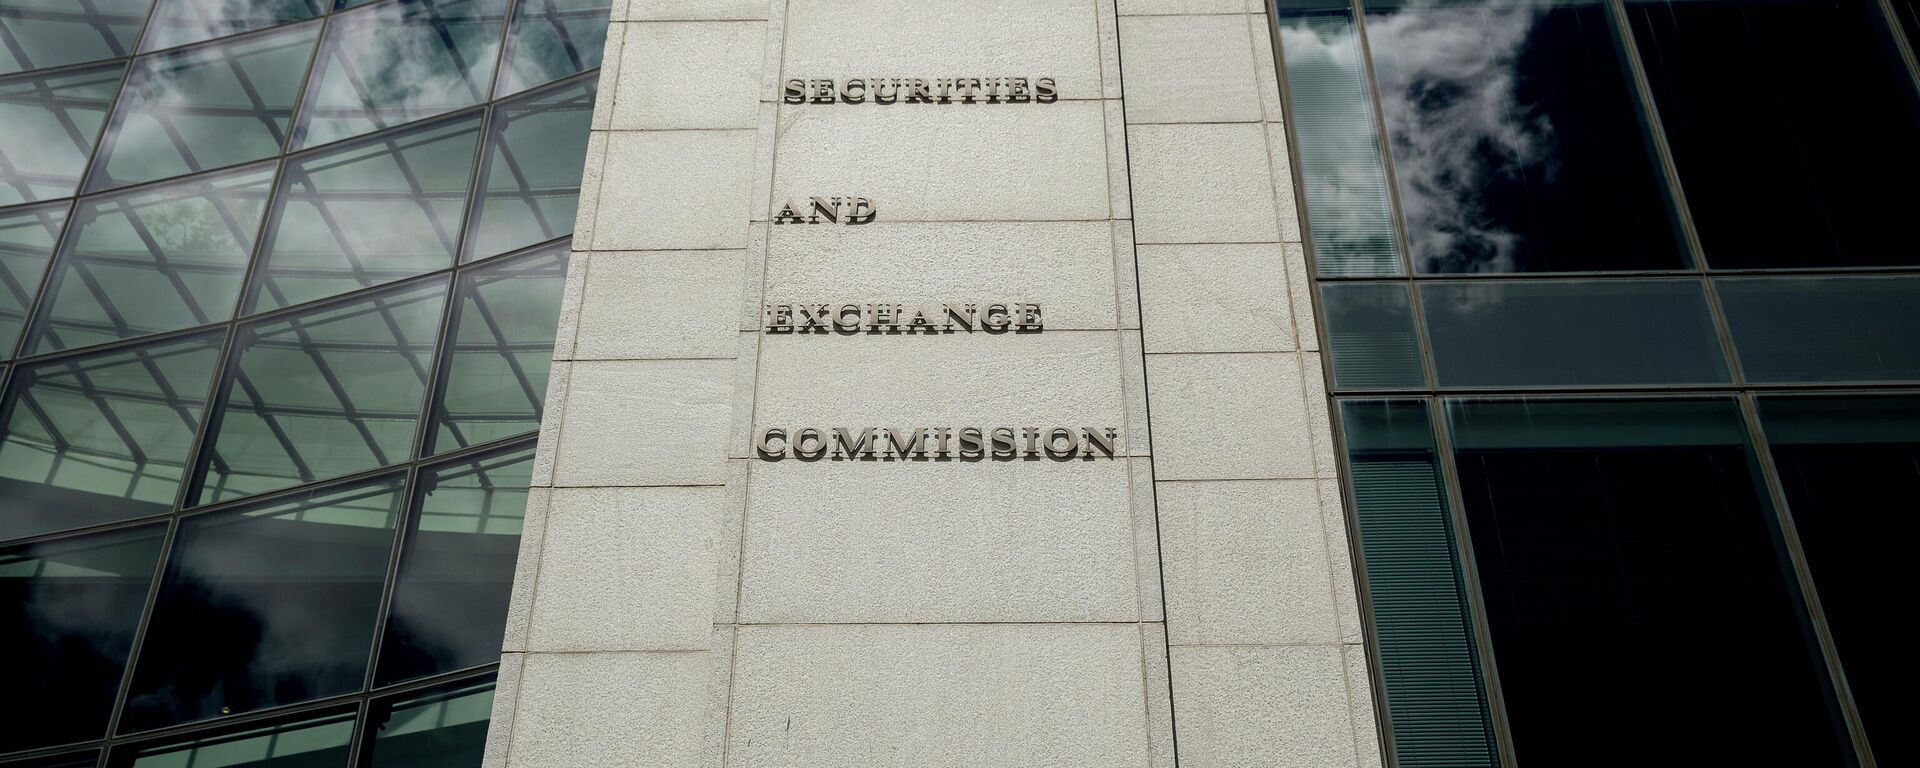 The U.S. Securities and Exchange Commission building in Washington is seen on Aug. 5, 2017. - Sputnik International, 1920, 03.05.2022